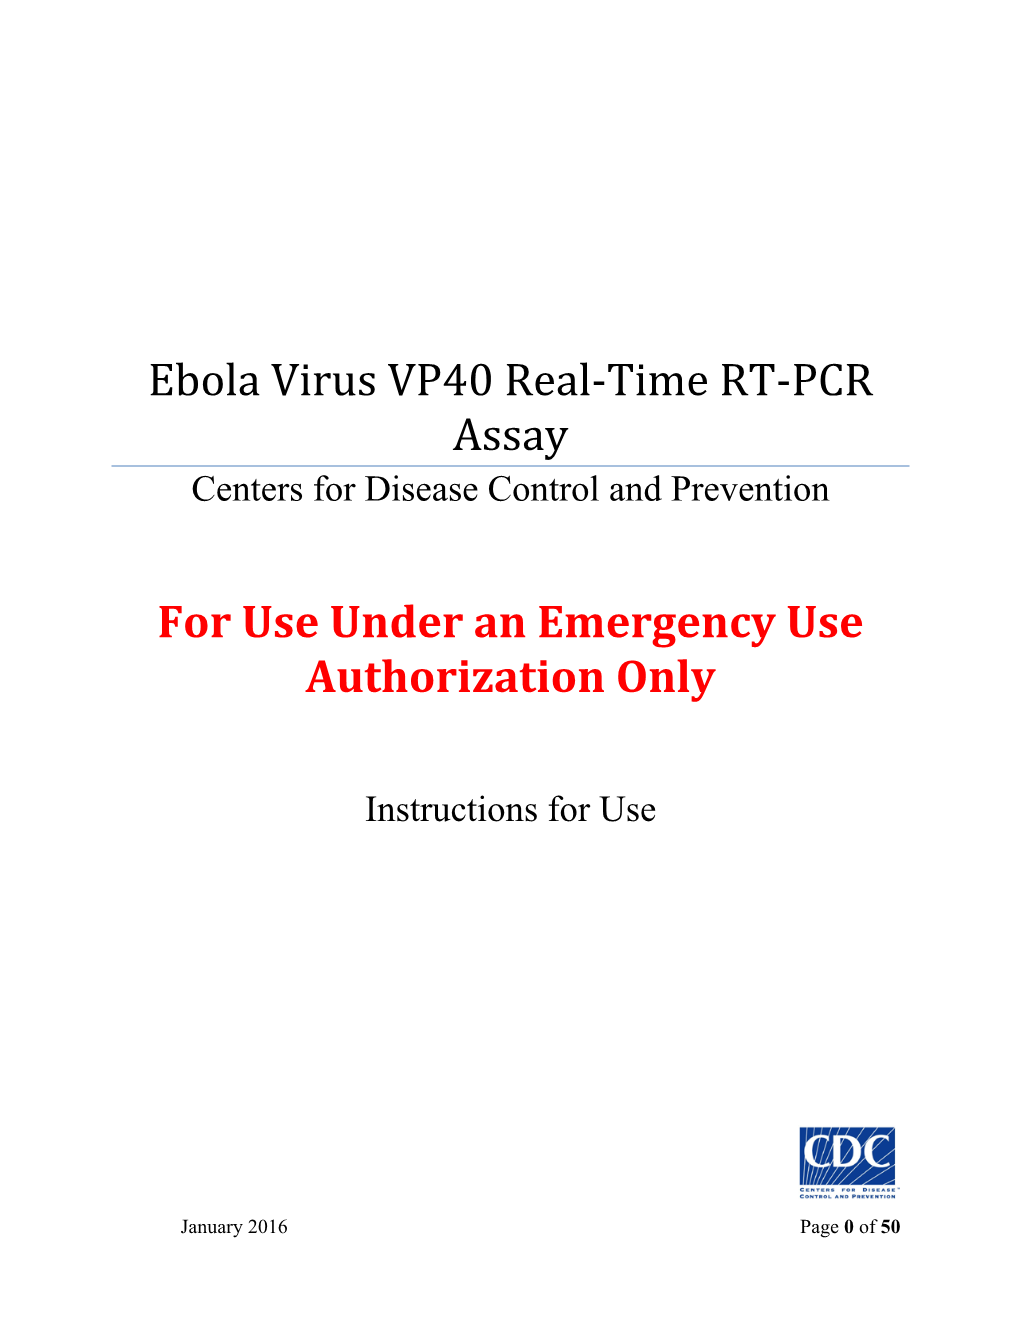 Ebola Virus VP40 Real-Time RT-PCR Assay for Use Under an Emergency Use Authorization Only